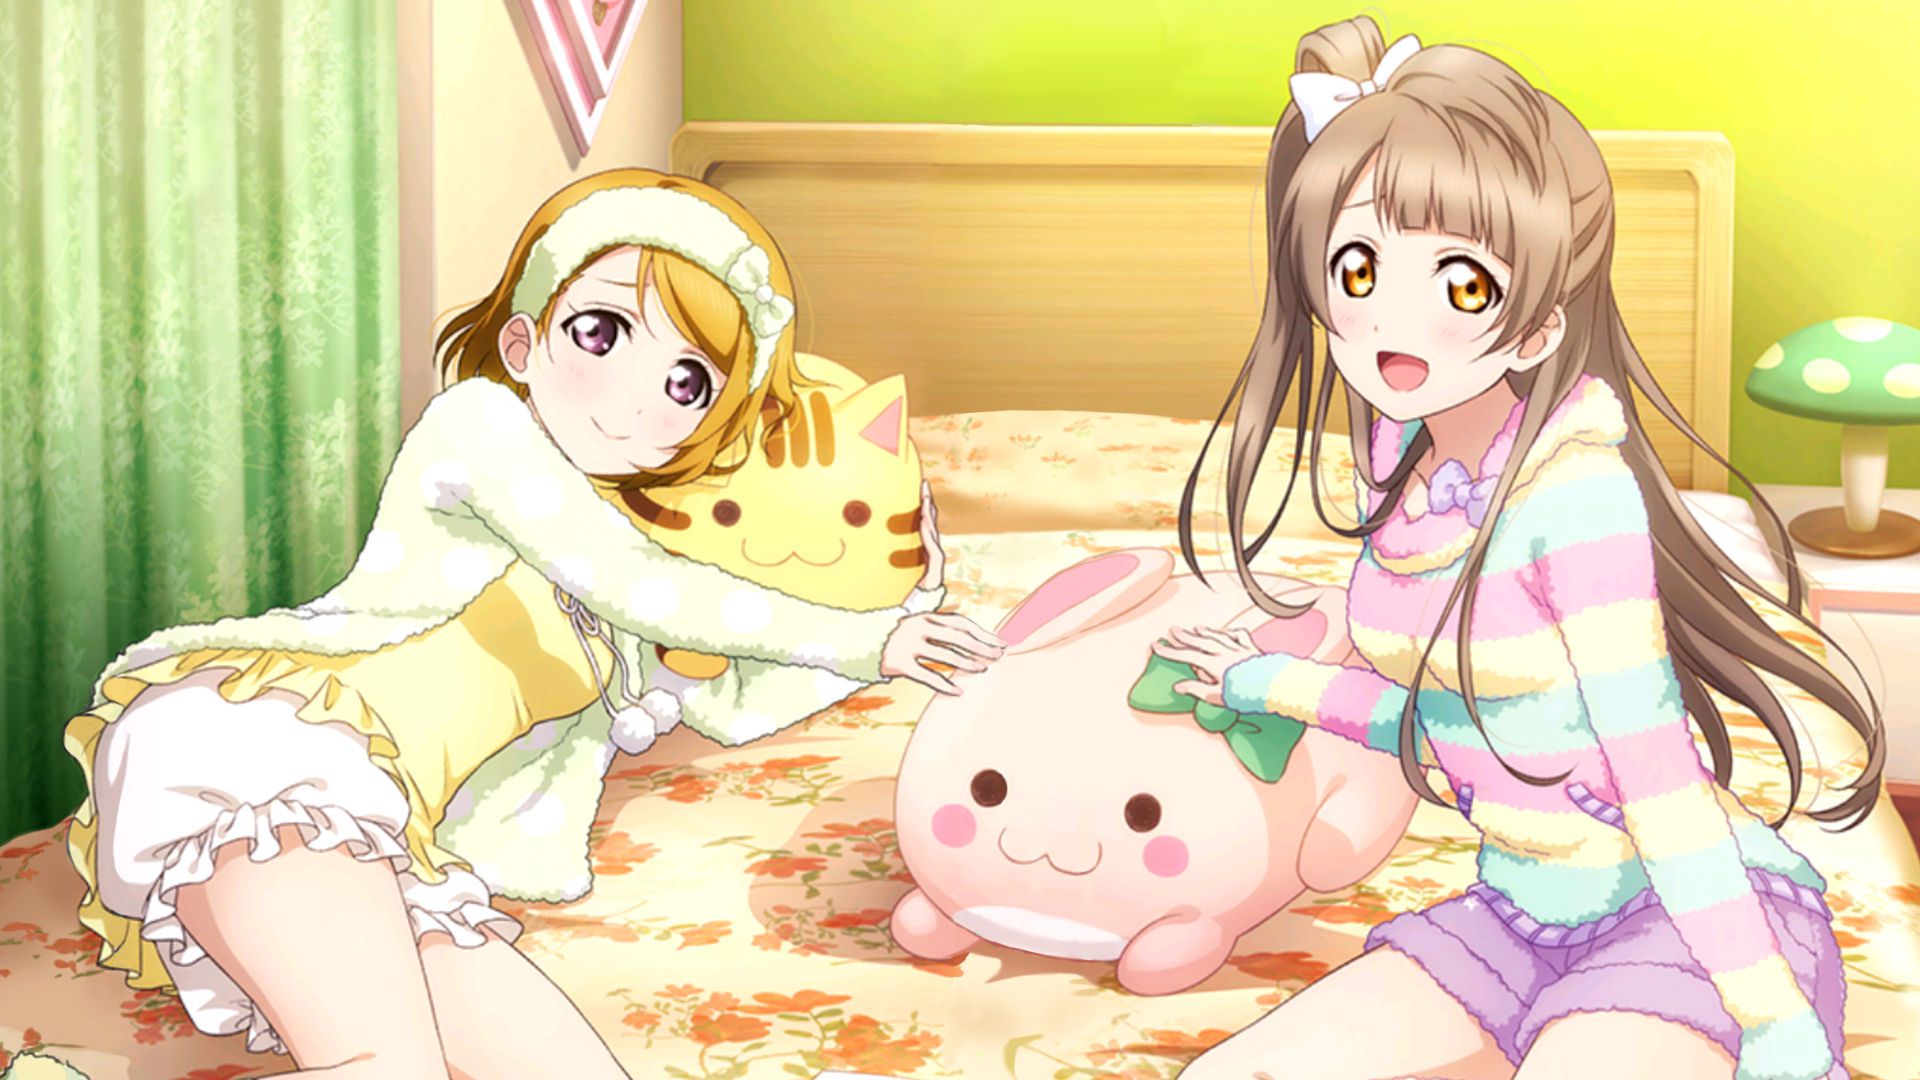 [Image] "love live! ' Big Totoro kotori-Chan and I ○ want erotic too awesome. wwwww 17